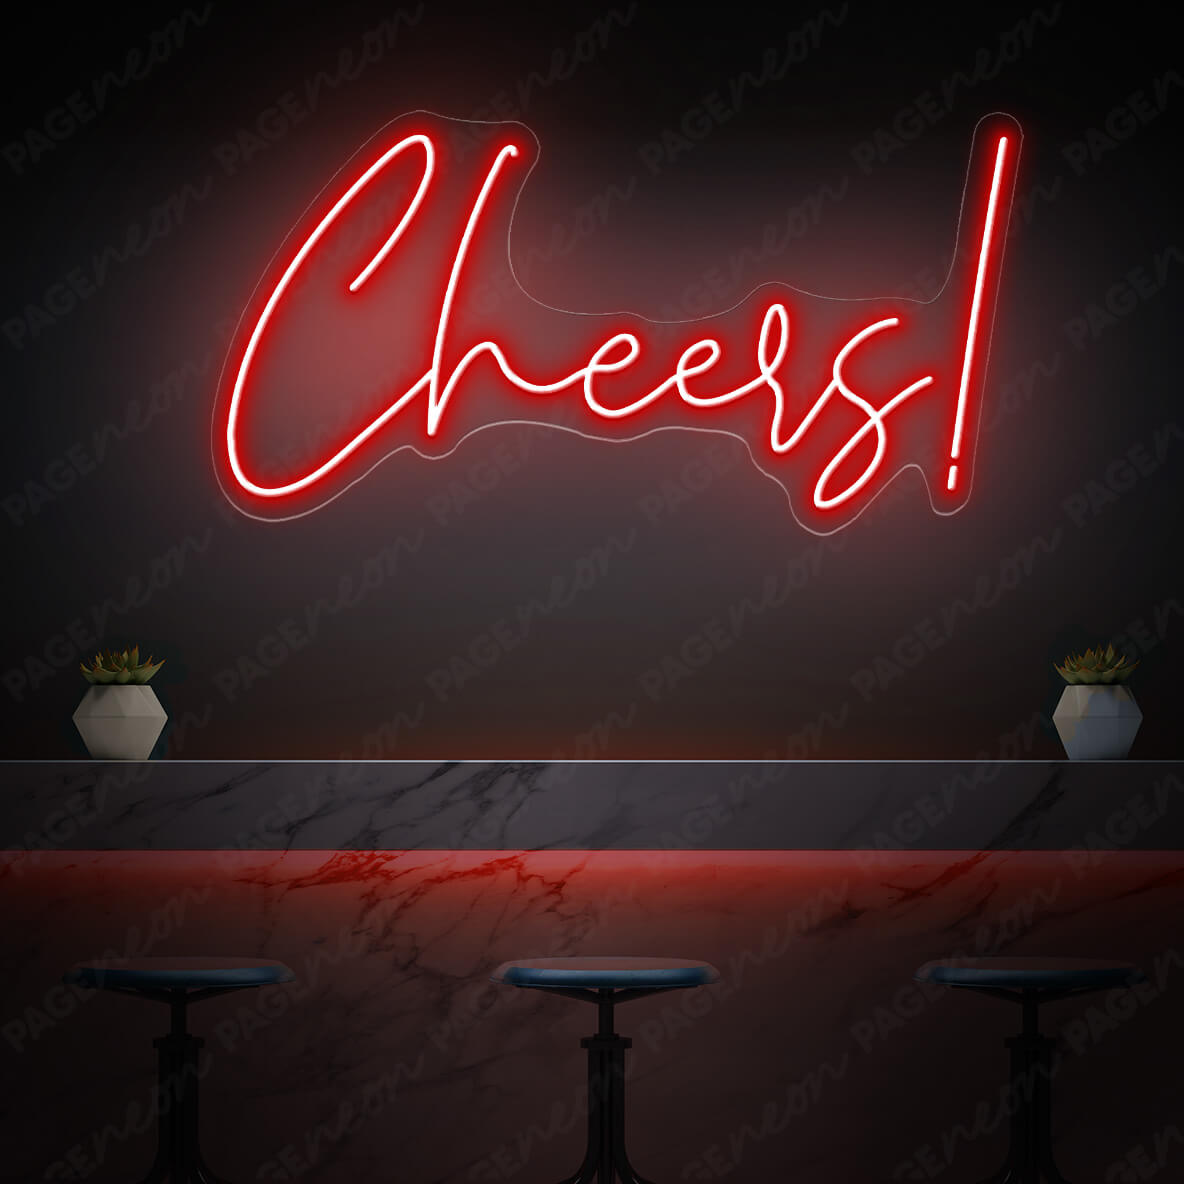 Cheers Neon Sign Bar Led Light Red